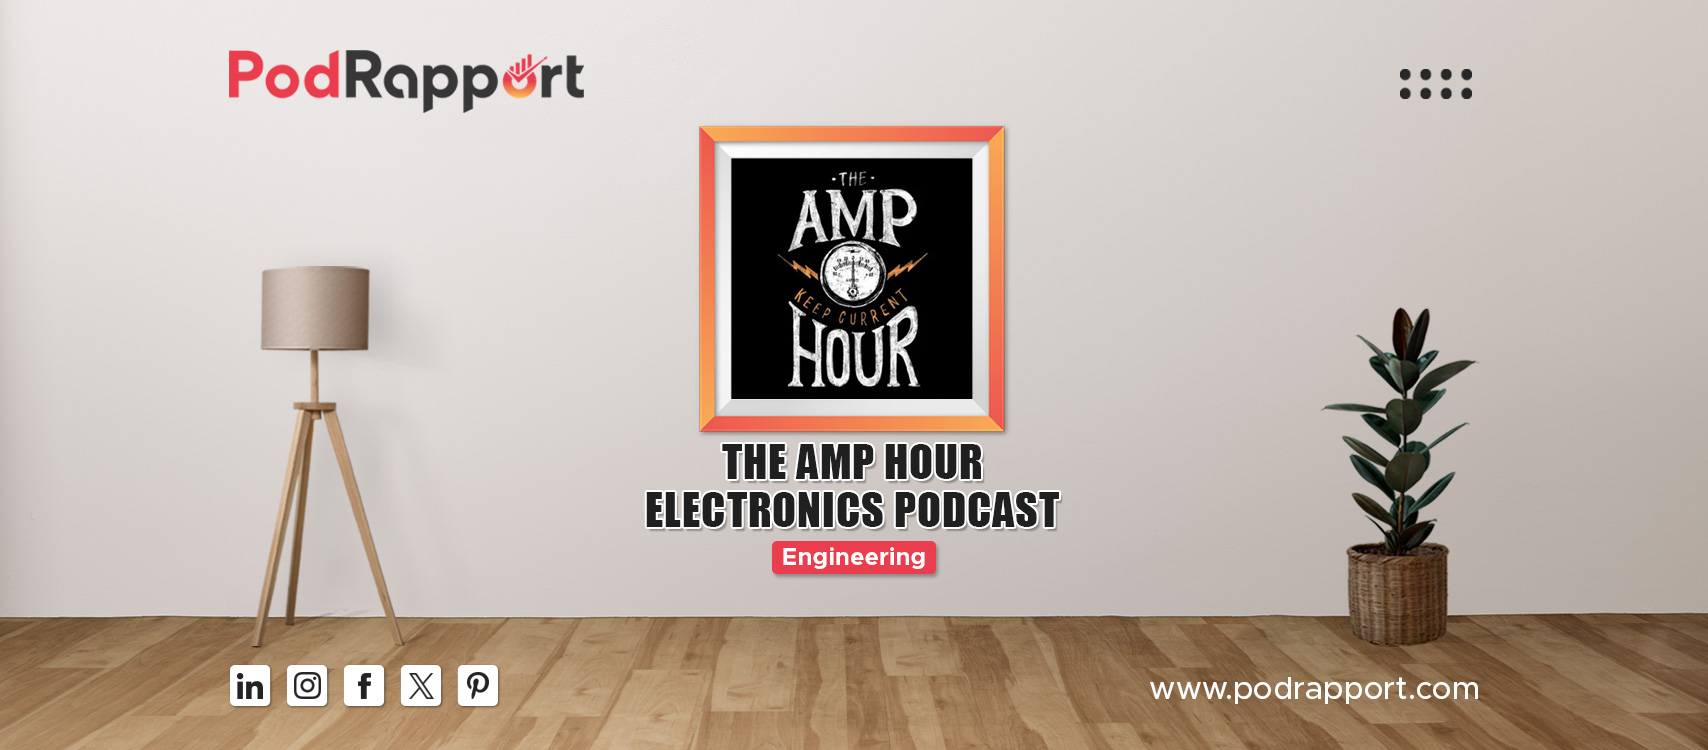 The Amp Hour Electronics Podcast